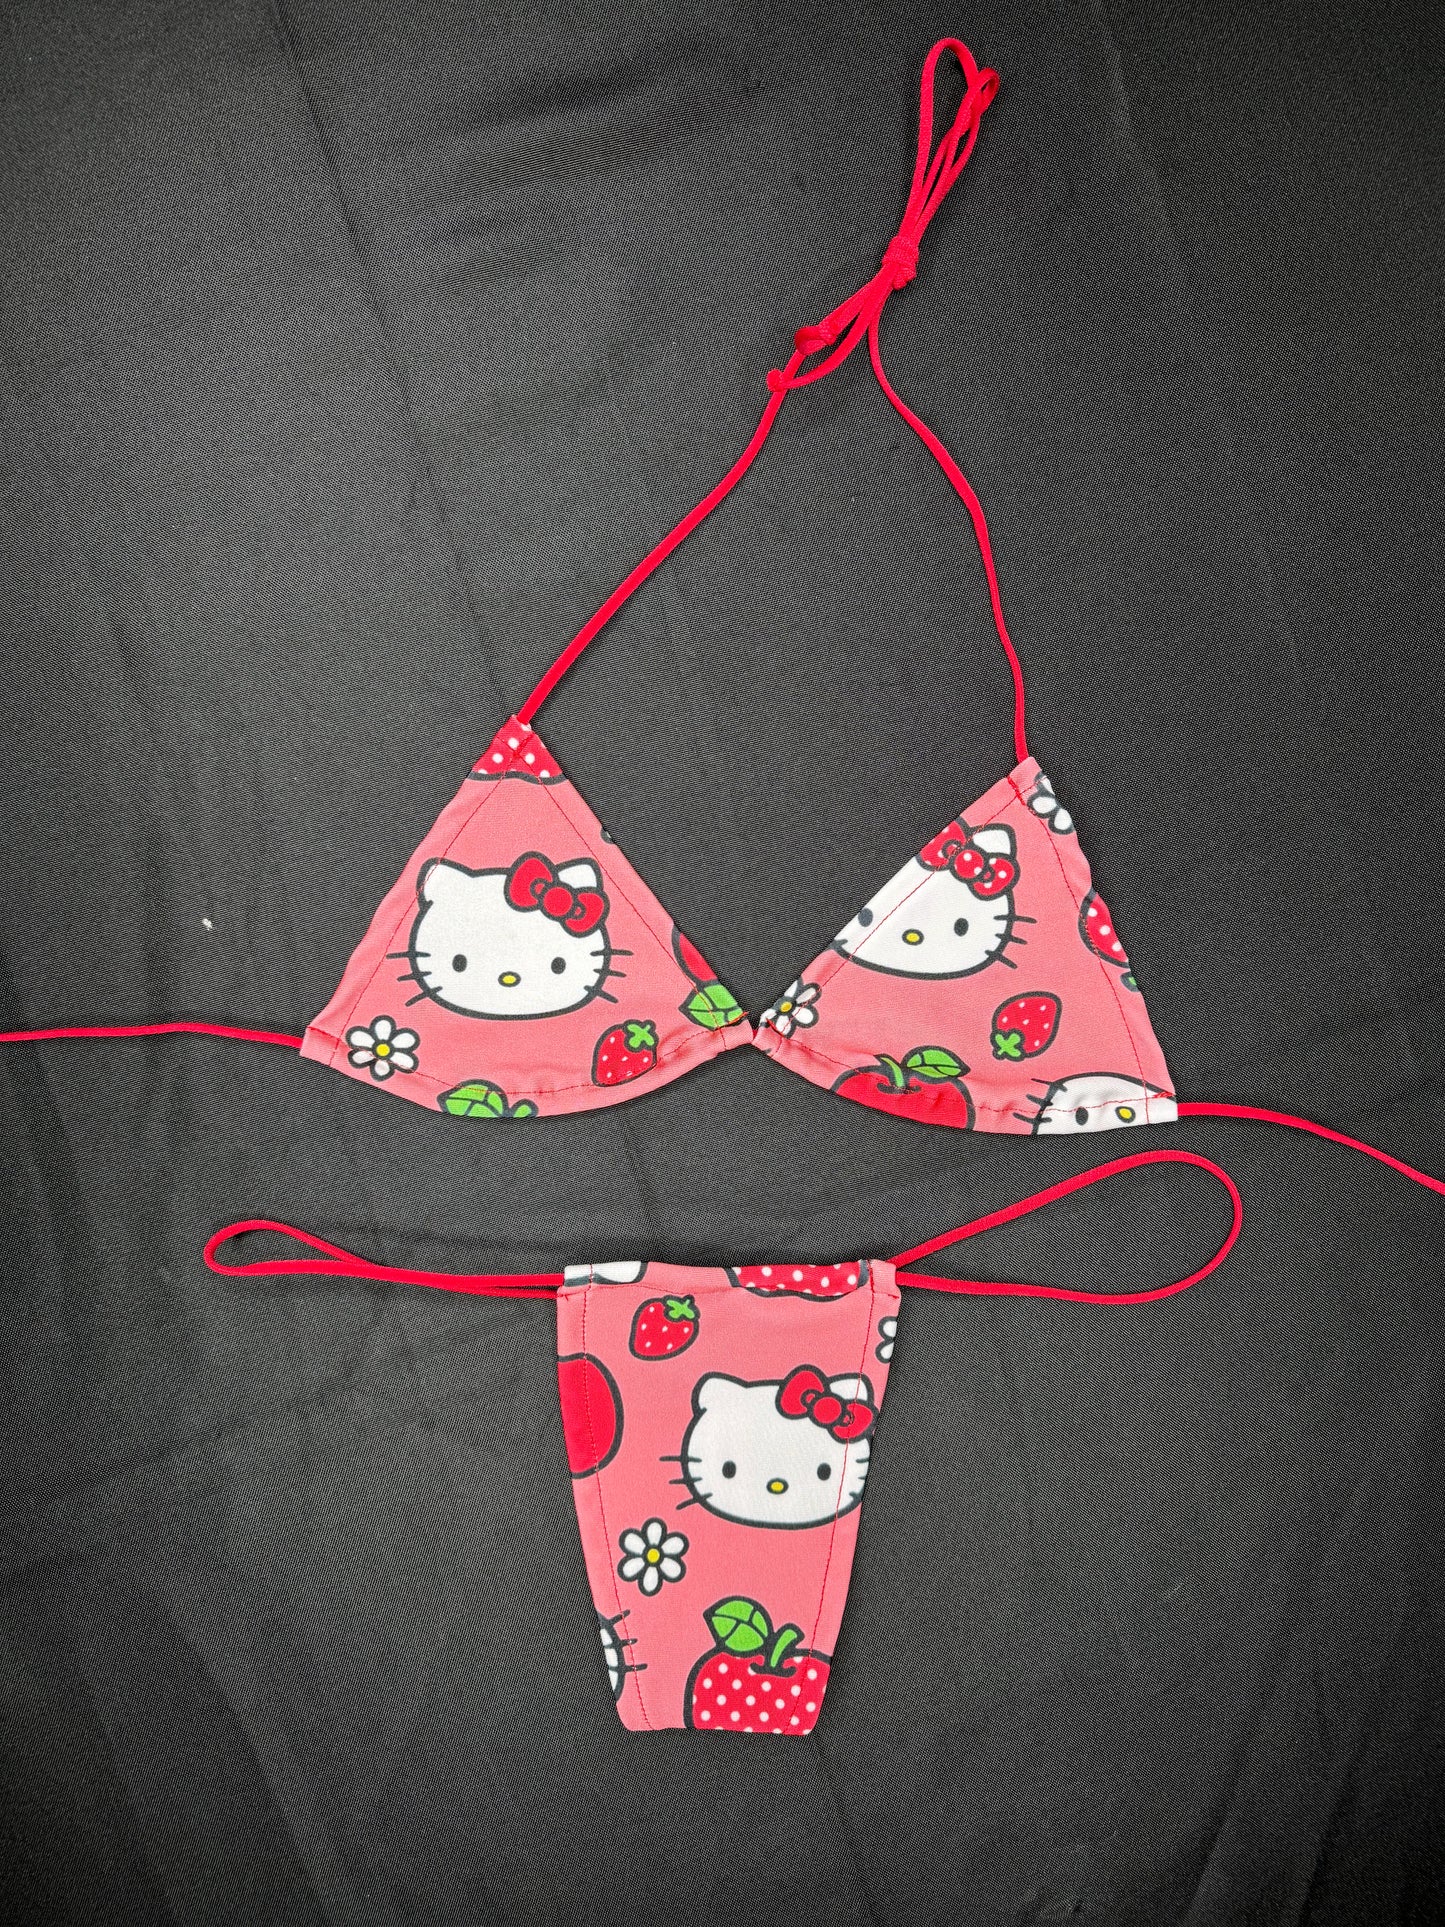 Red/Pink Kitty Two-Piece Micro Bikini Lingerie Outfit